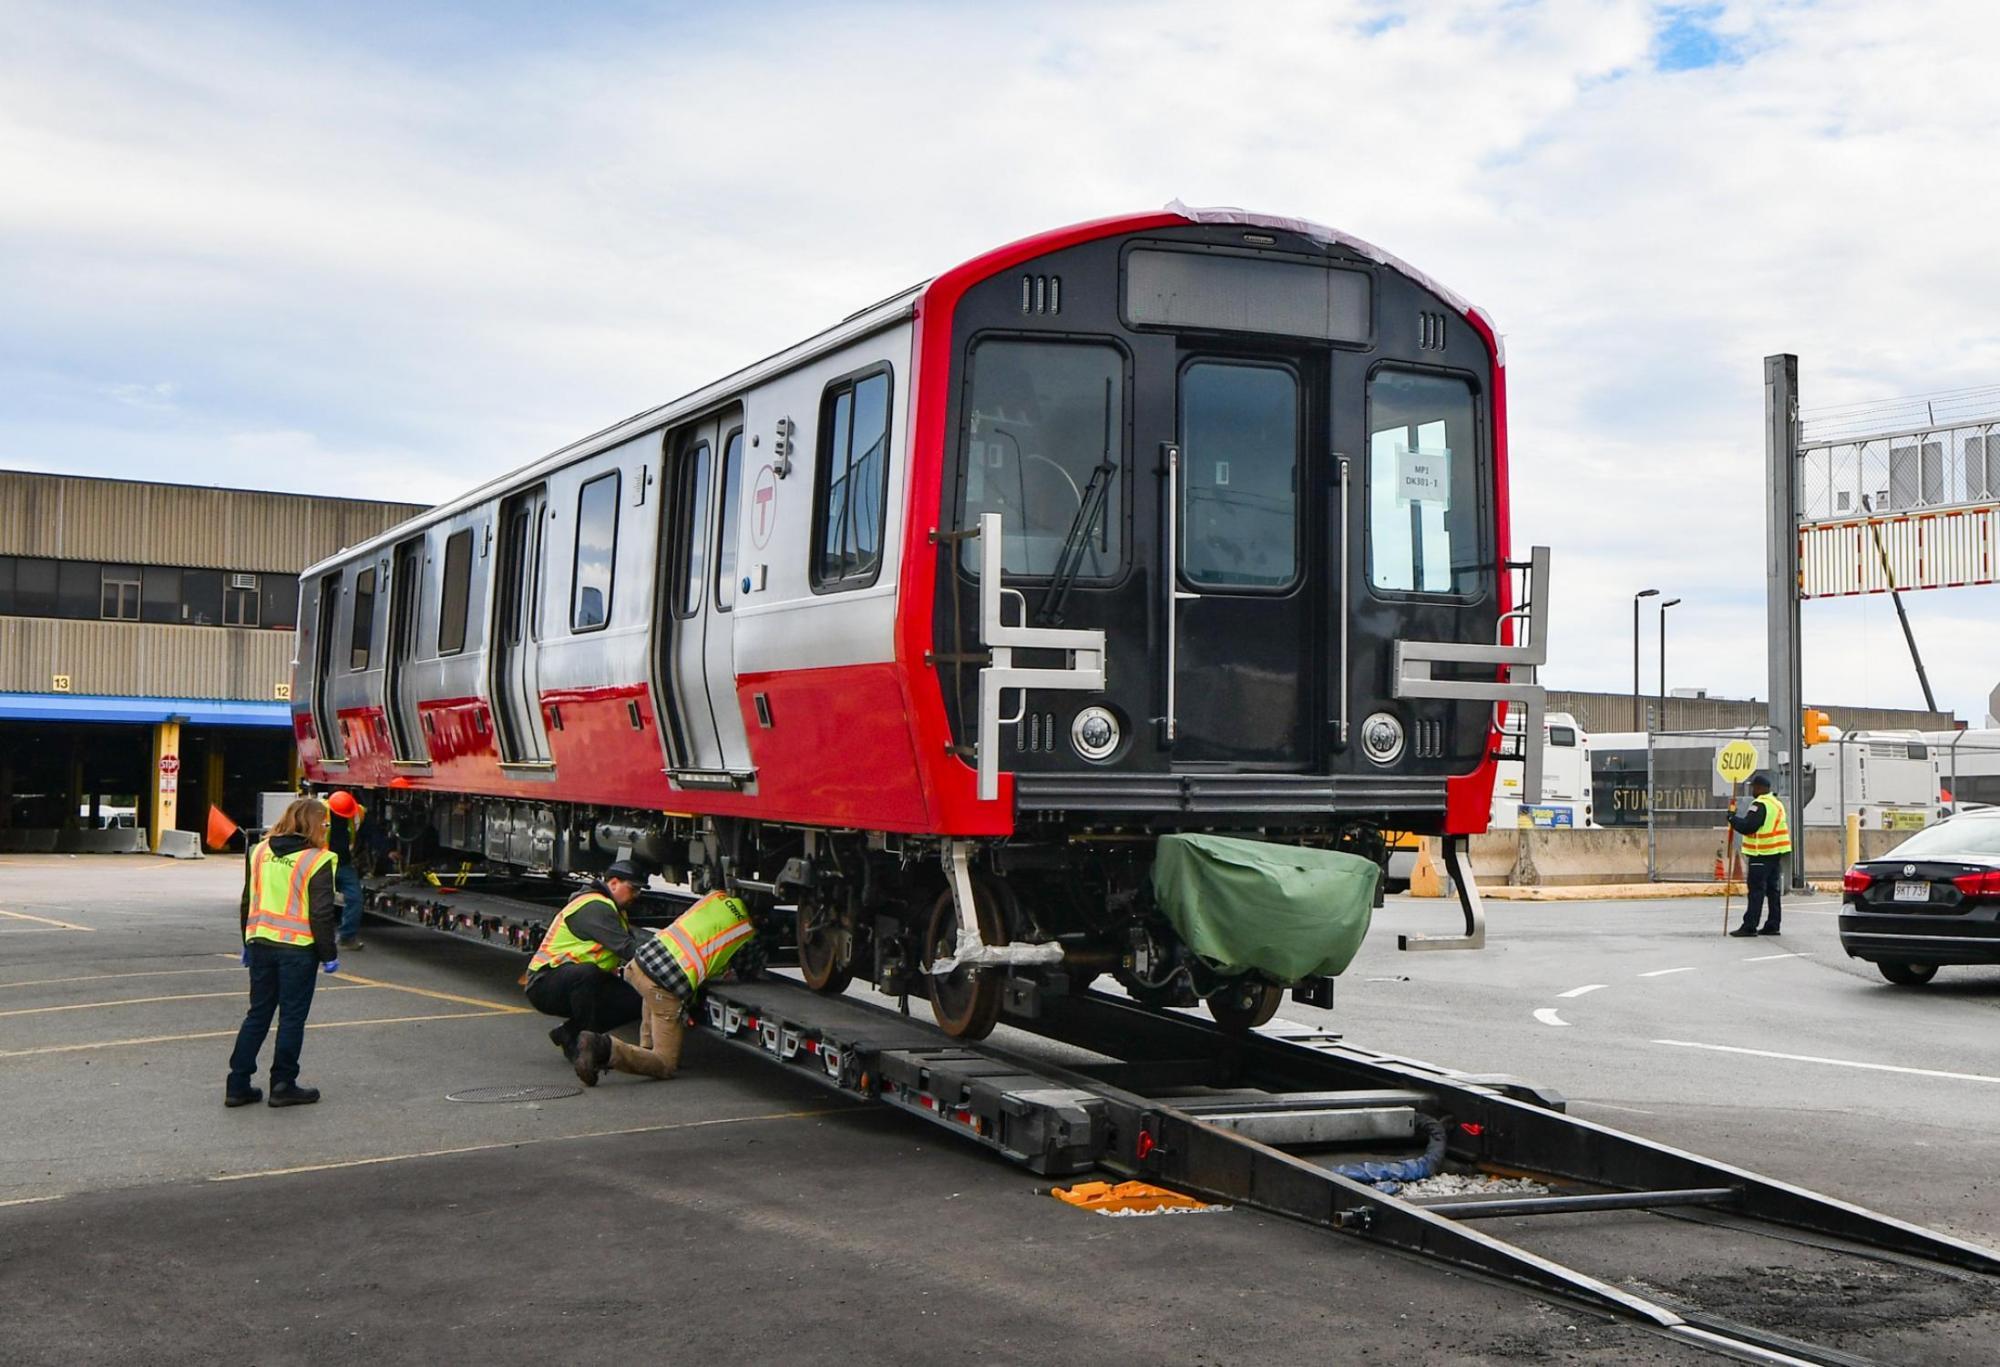 A new Red Line car delievered to Cabot Yard. MBTA workers help get it off the trailer.